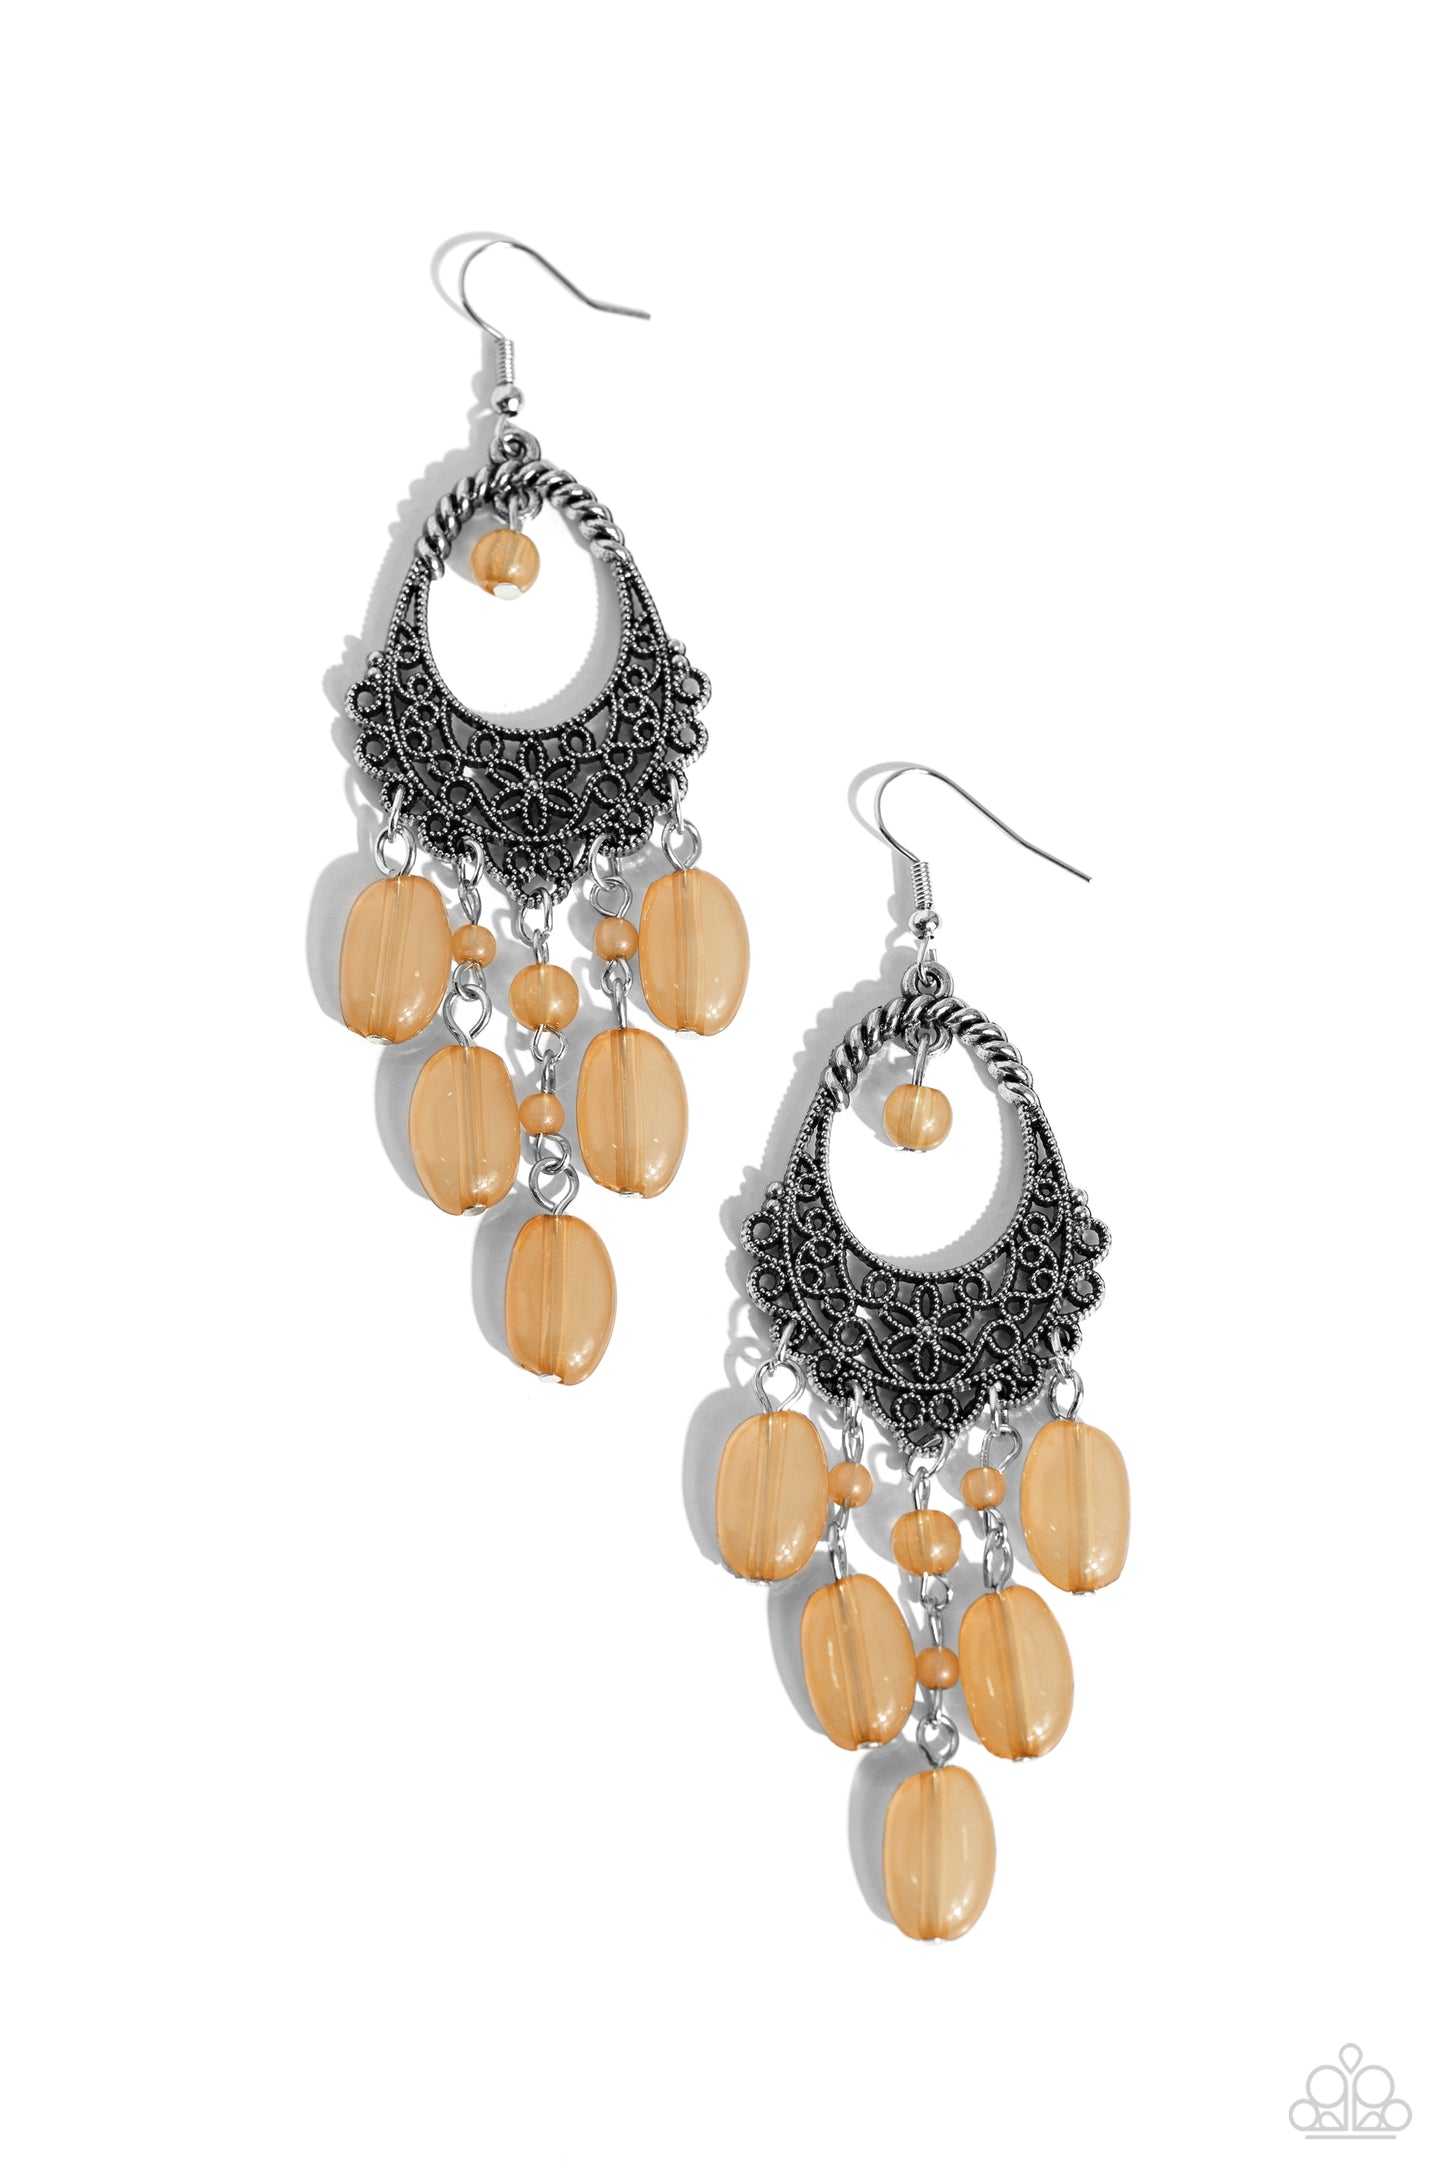 Paparazzi Accessories - Botanical Escape - Brown Earrings studded silver filigree vines across the bottom of a decorative teardrop frame, blooming into a whimsical floral pattern. A single brown bead swings from the top of the frame, colorfully complementing the round and oval beaded fringe dancing from the bottom of the display. Earring attaches to a standard fishhook fitting. Featured inside The Preview at Made for More! Sold as one pair of earrings.